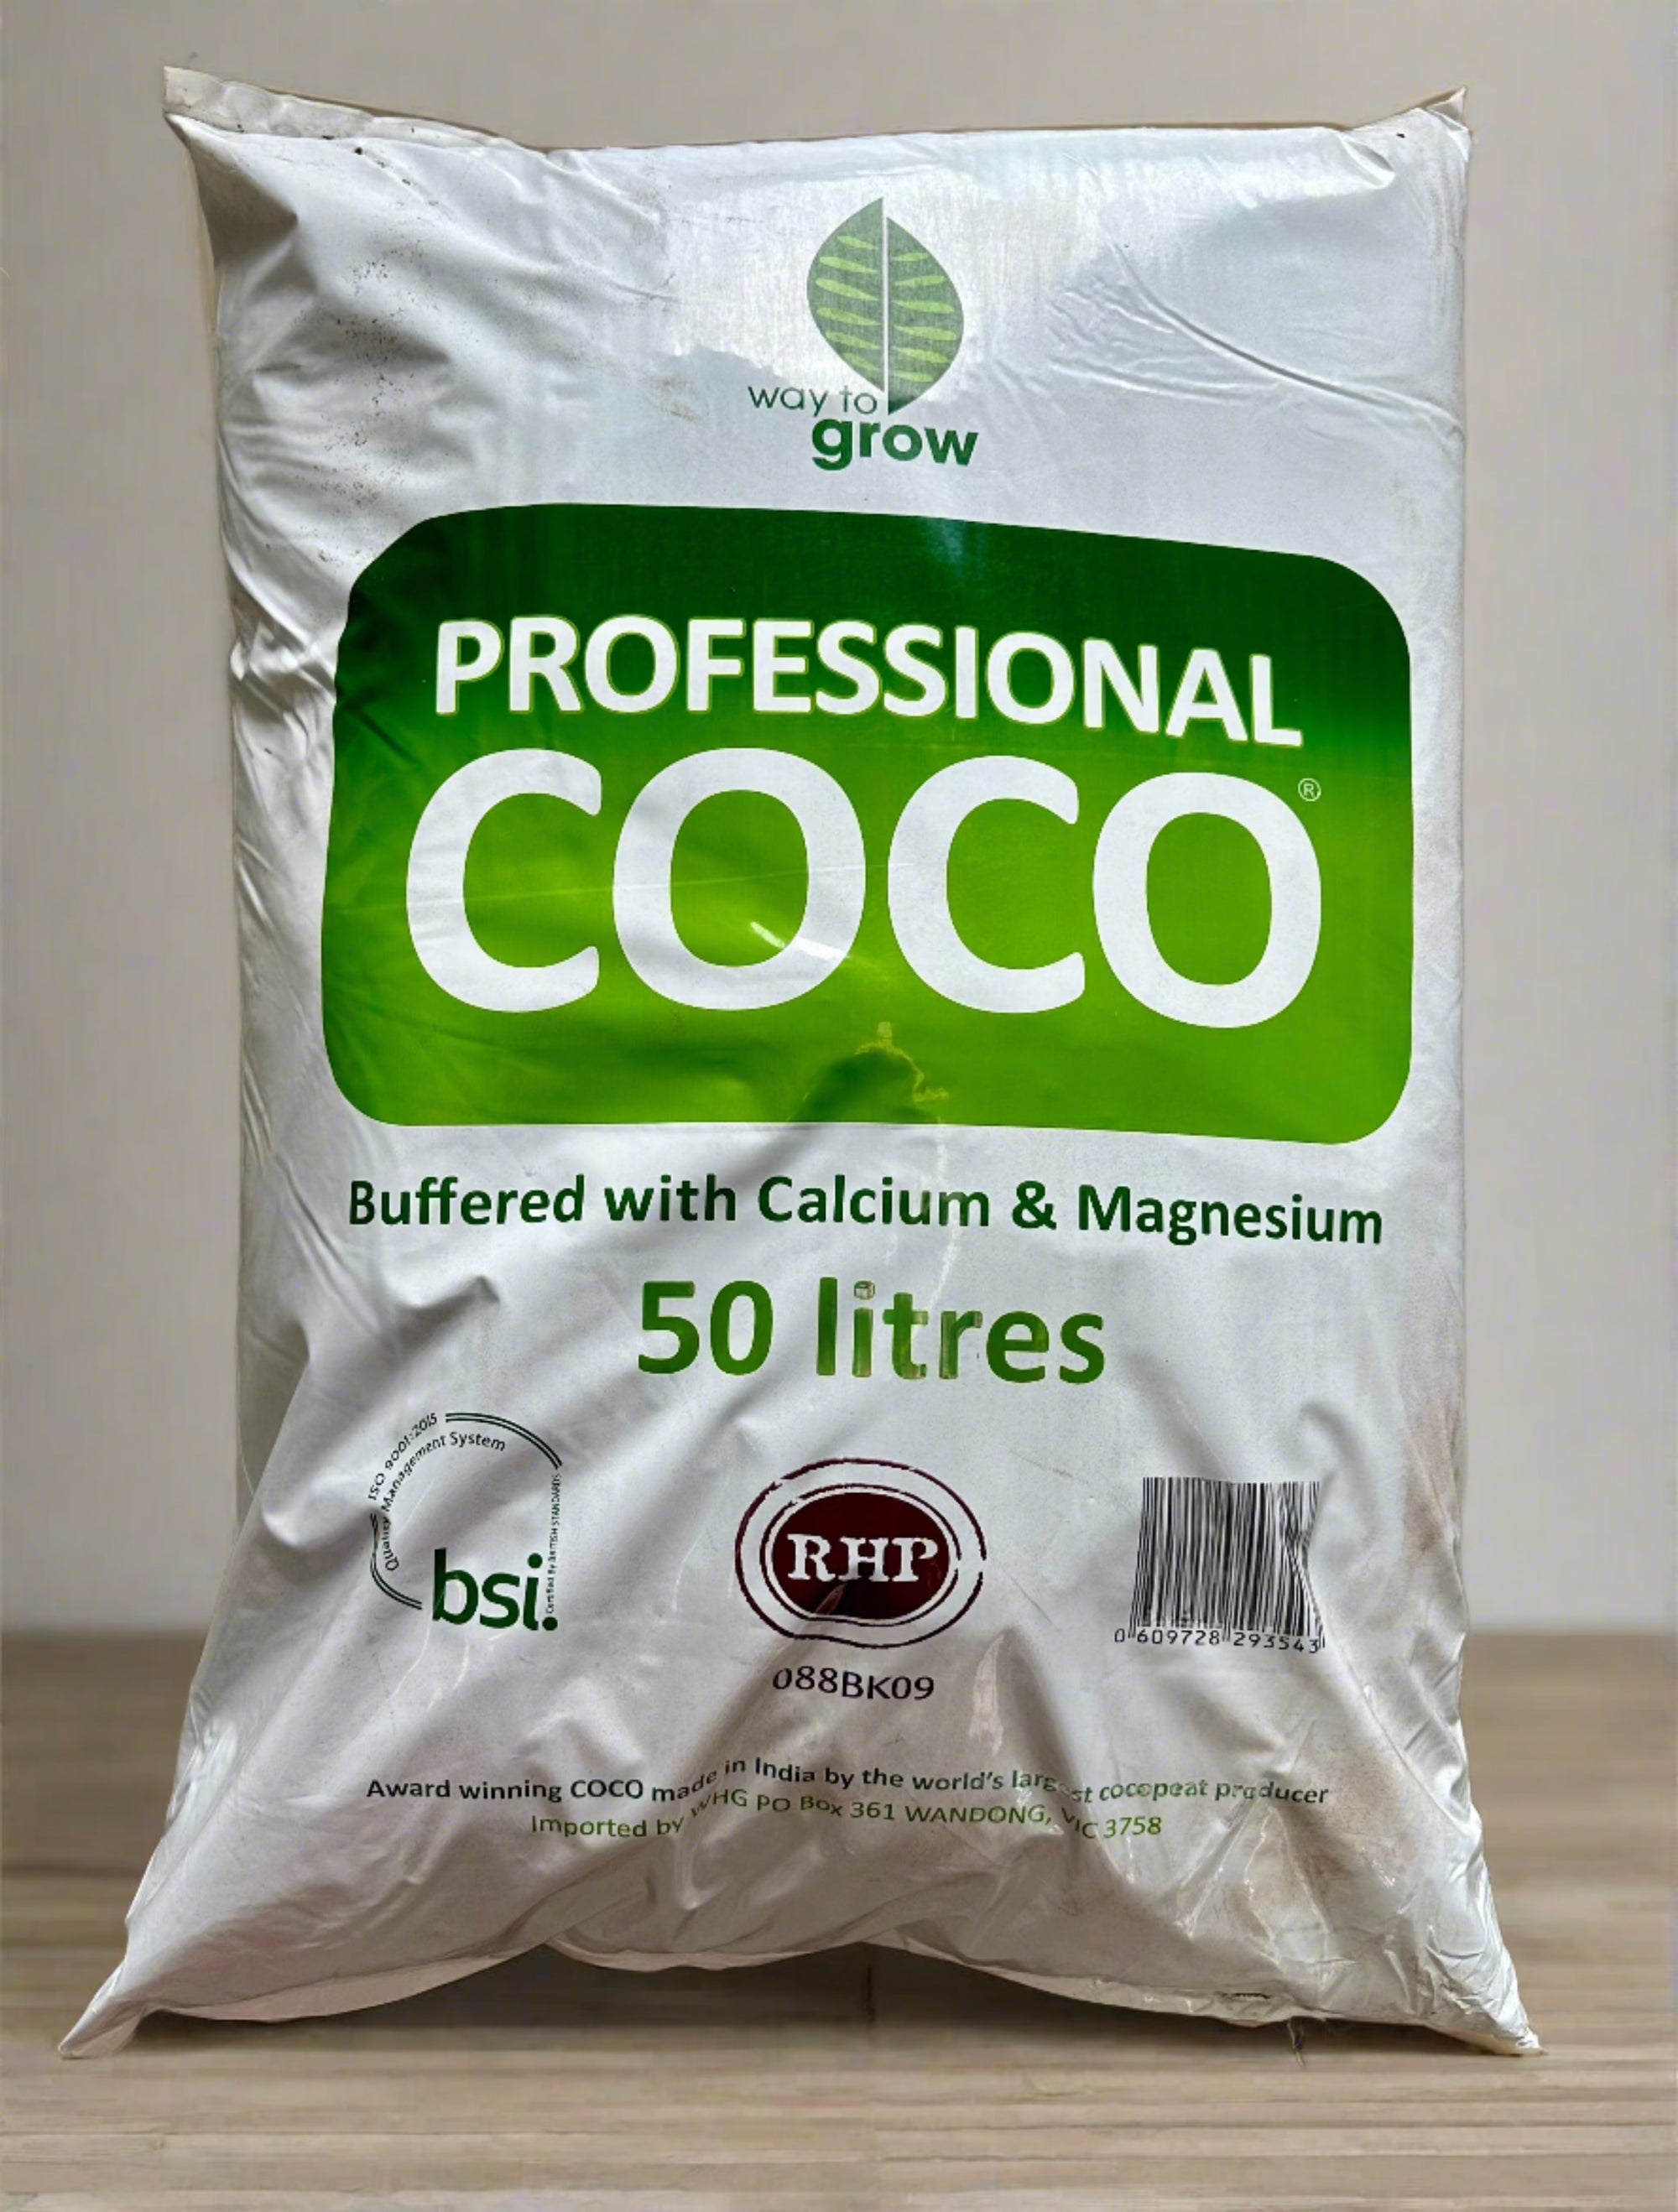 Pure COCO 50 Litre bags Way To Grow